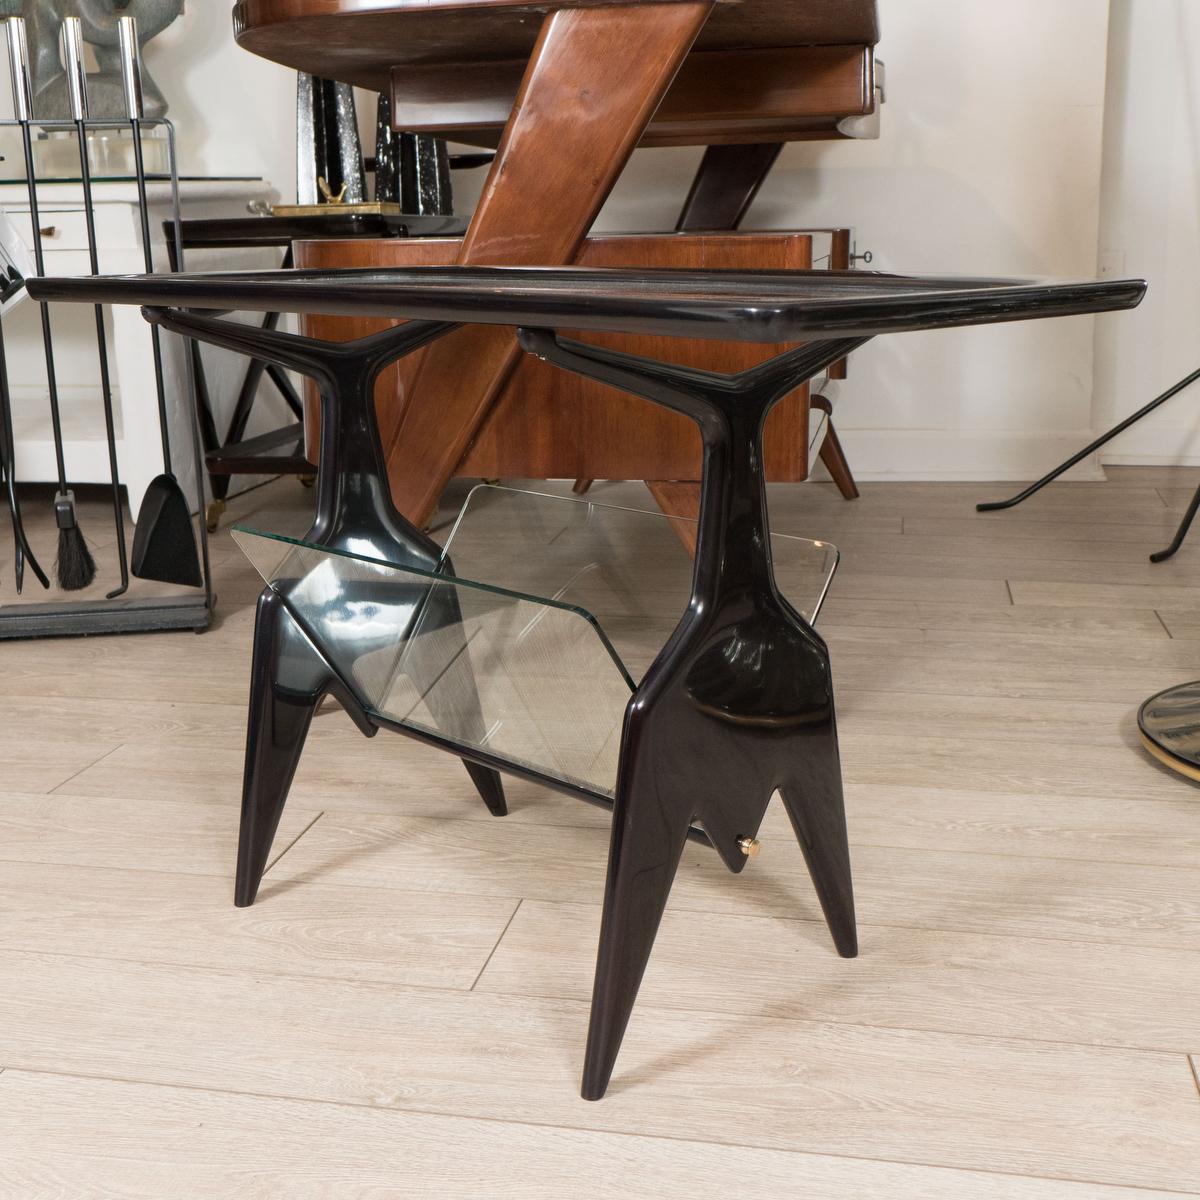 Ebonized wood table with glass top and magazine rack base.